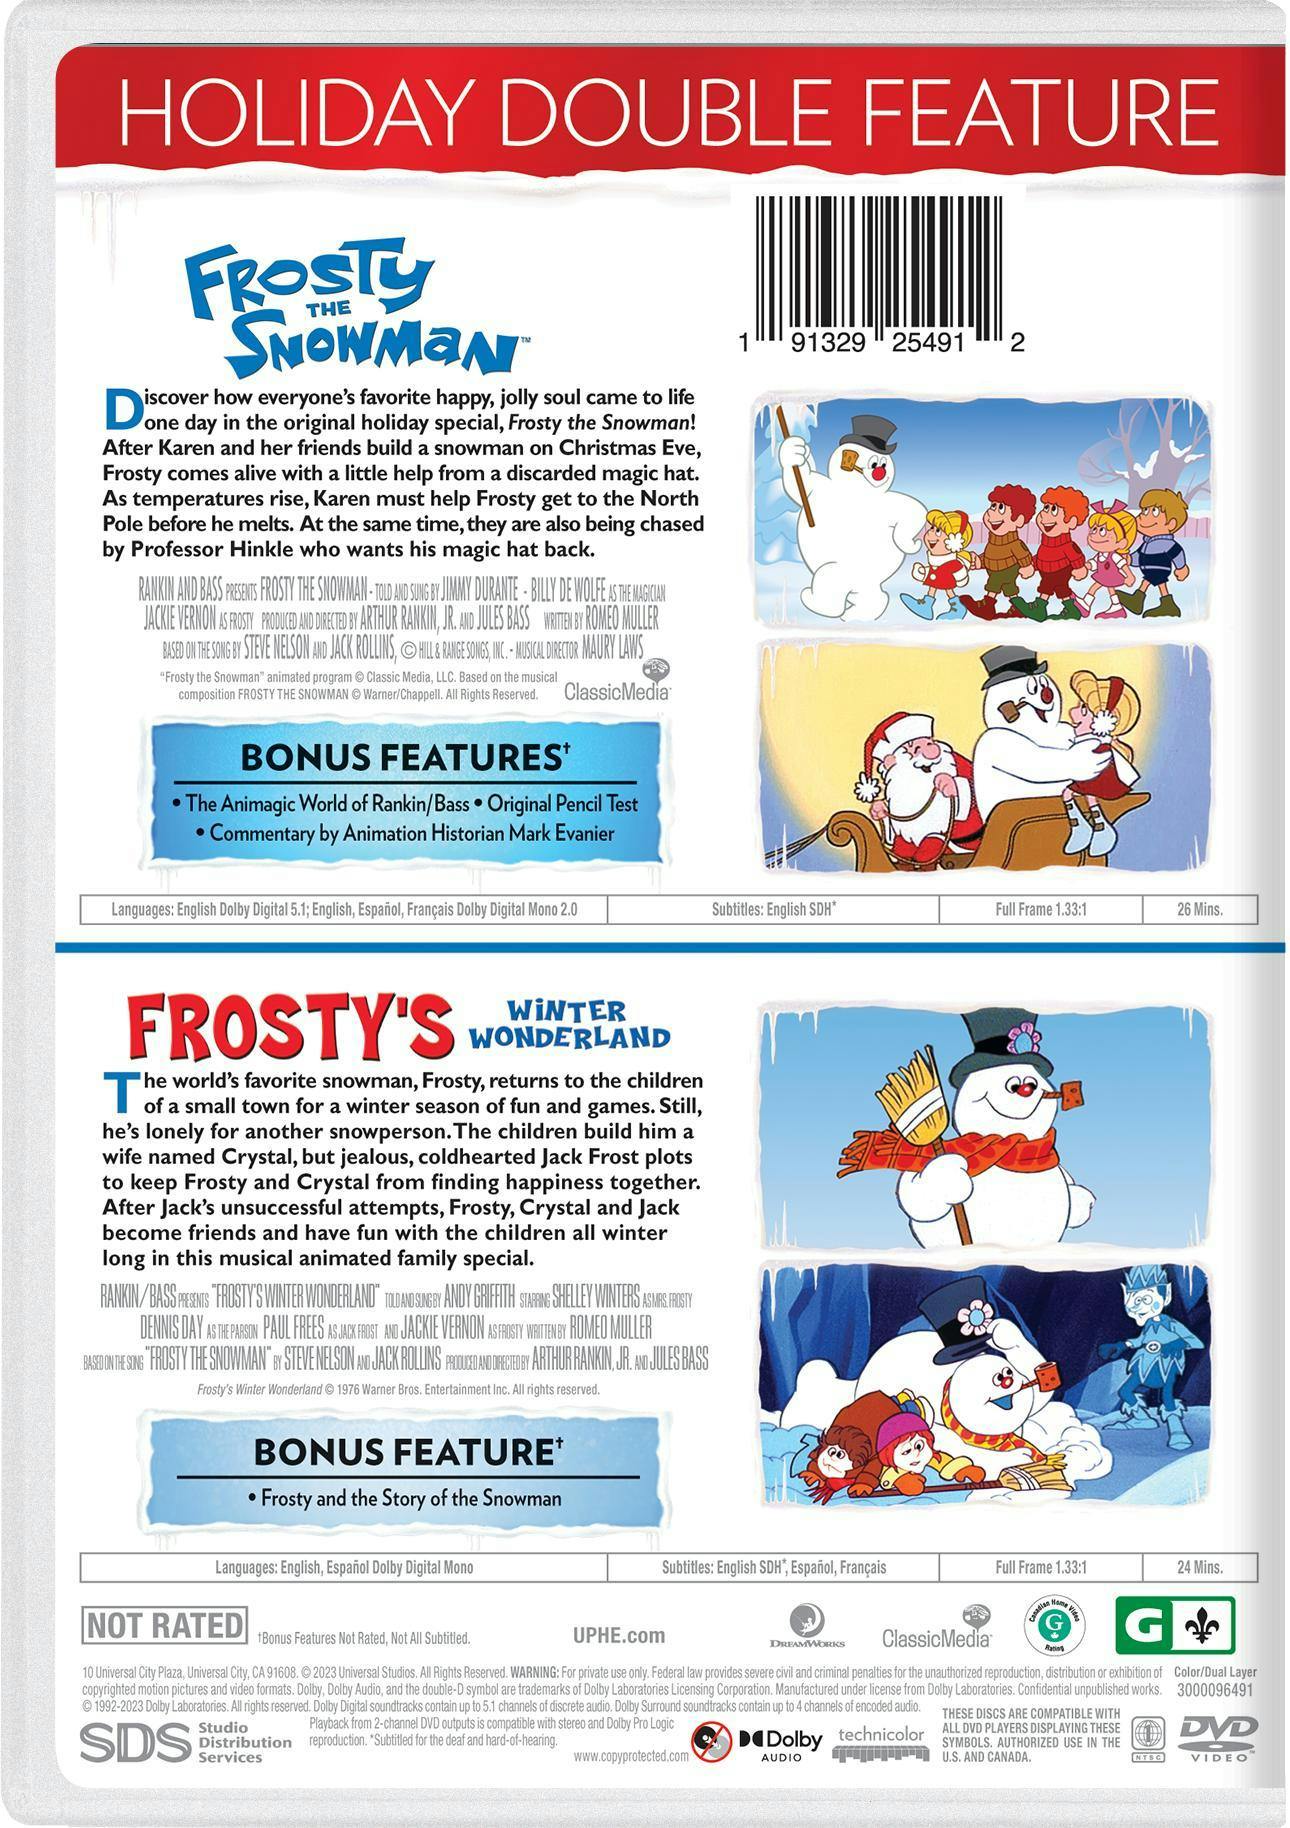 Buy Frosty the Snowman Holiday Double Feature DVD | GRUV